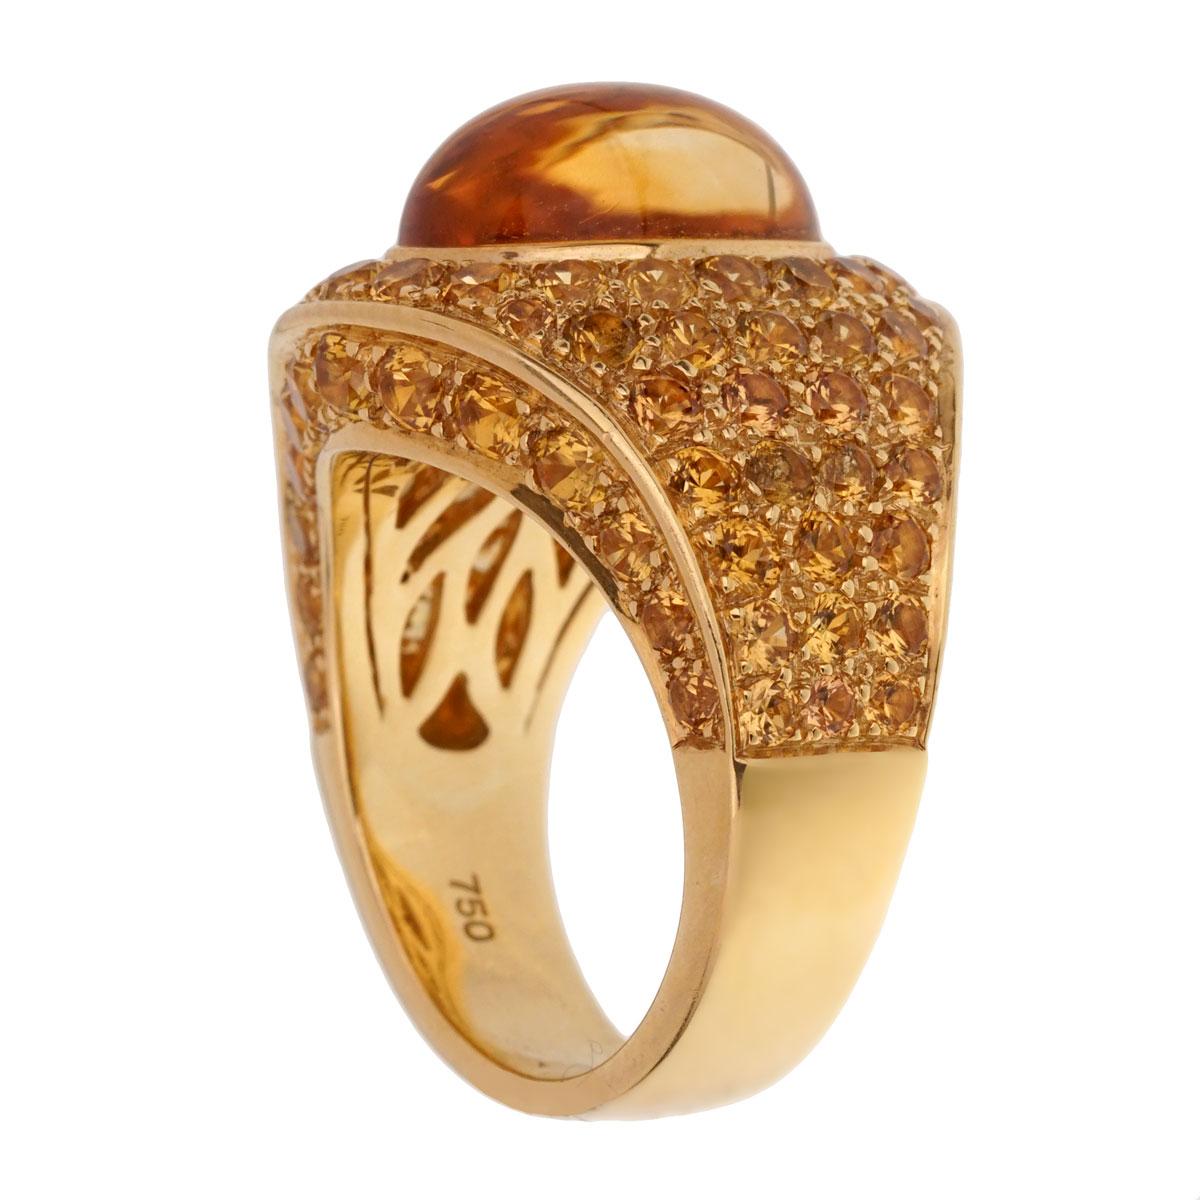 Roberto Coin 10.9 Carat Citrine Pave Cocktail Gold Ring In Excellent Condition For Sale In Feasterville, PA